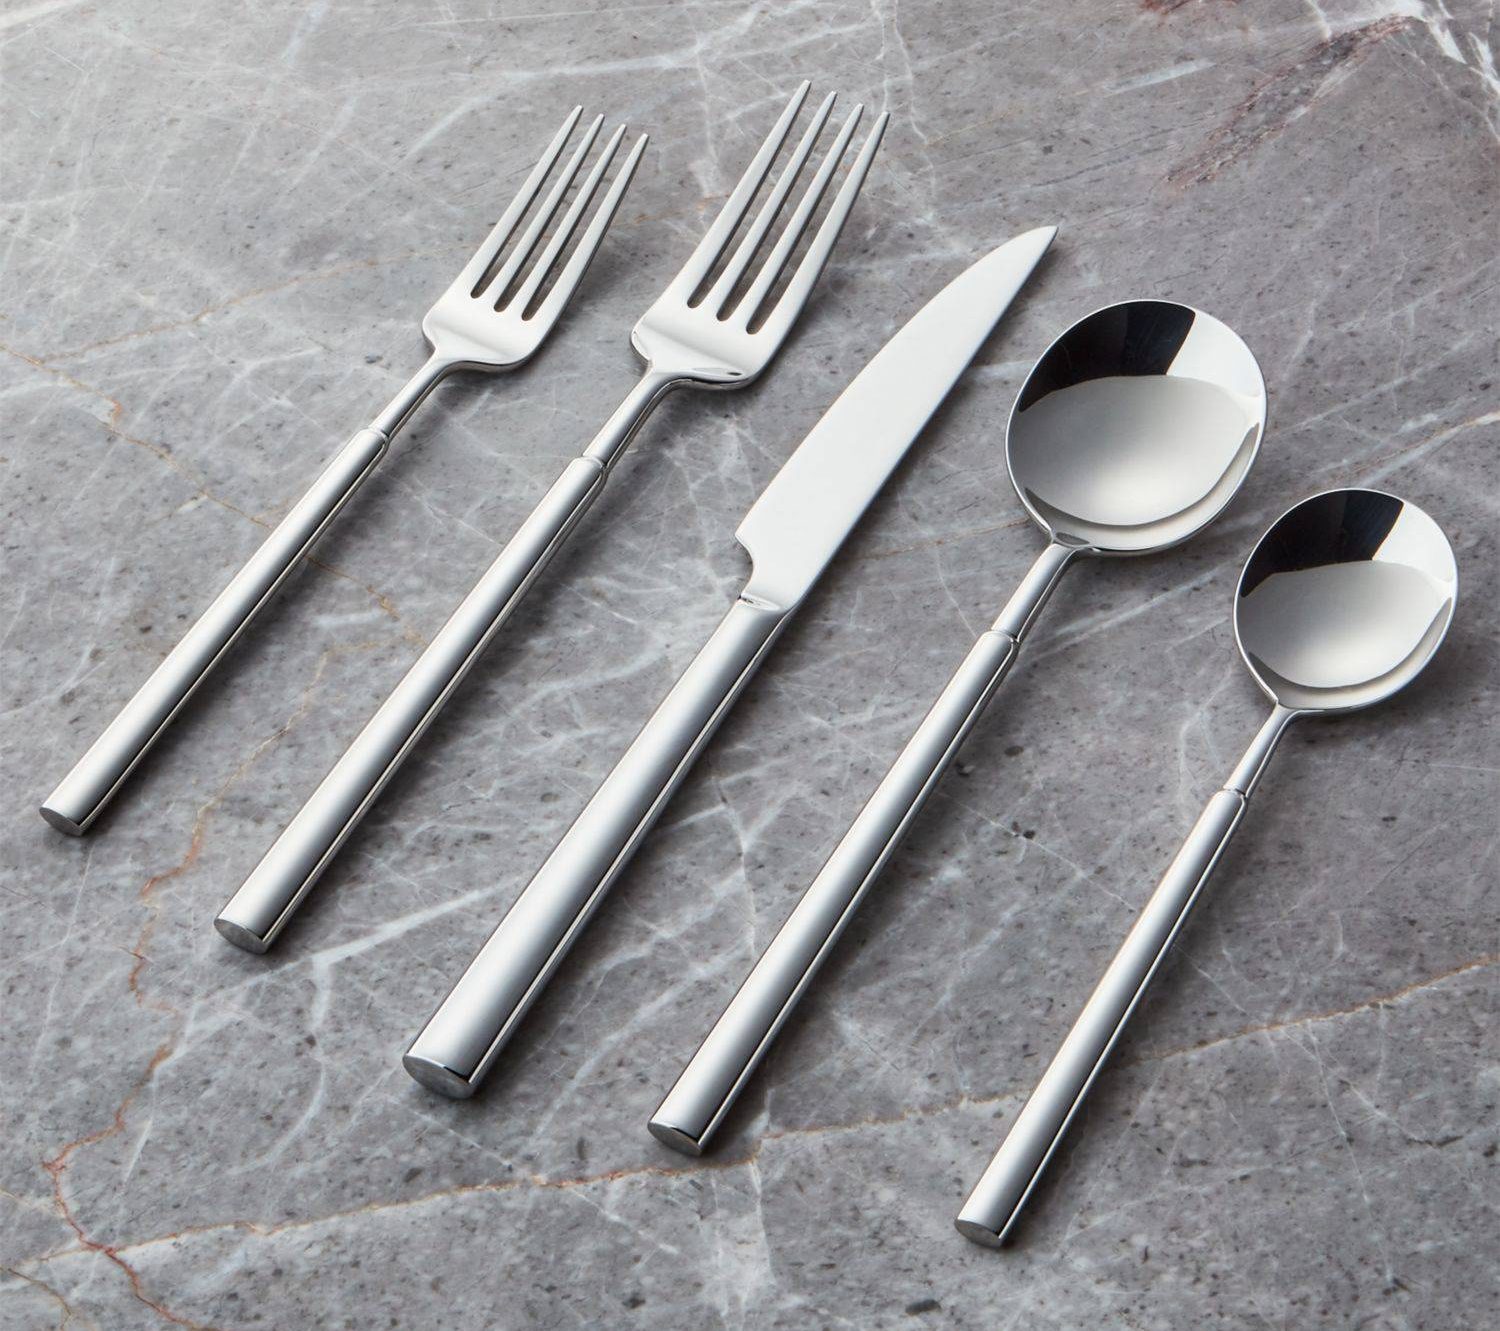 Miles Silverware Set From Crate and Barrel - Best Flatware Sets